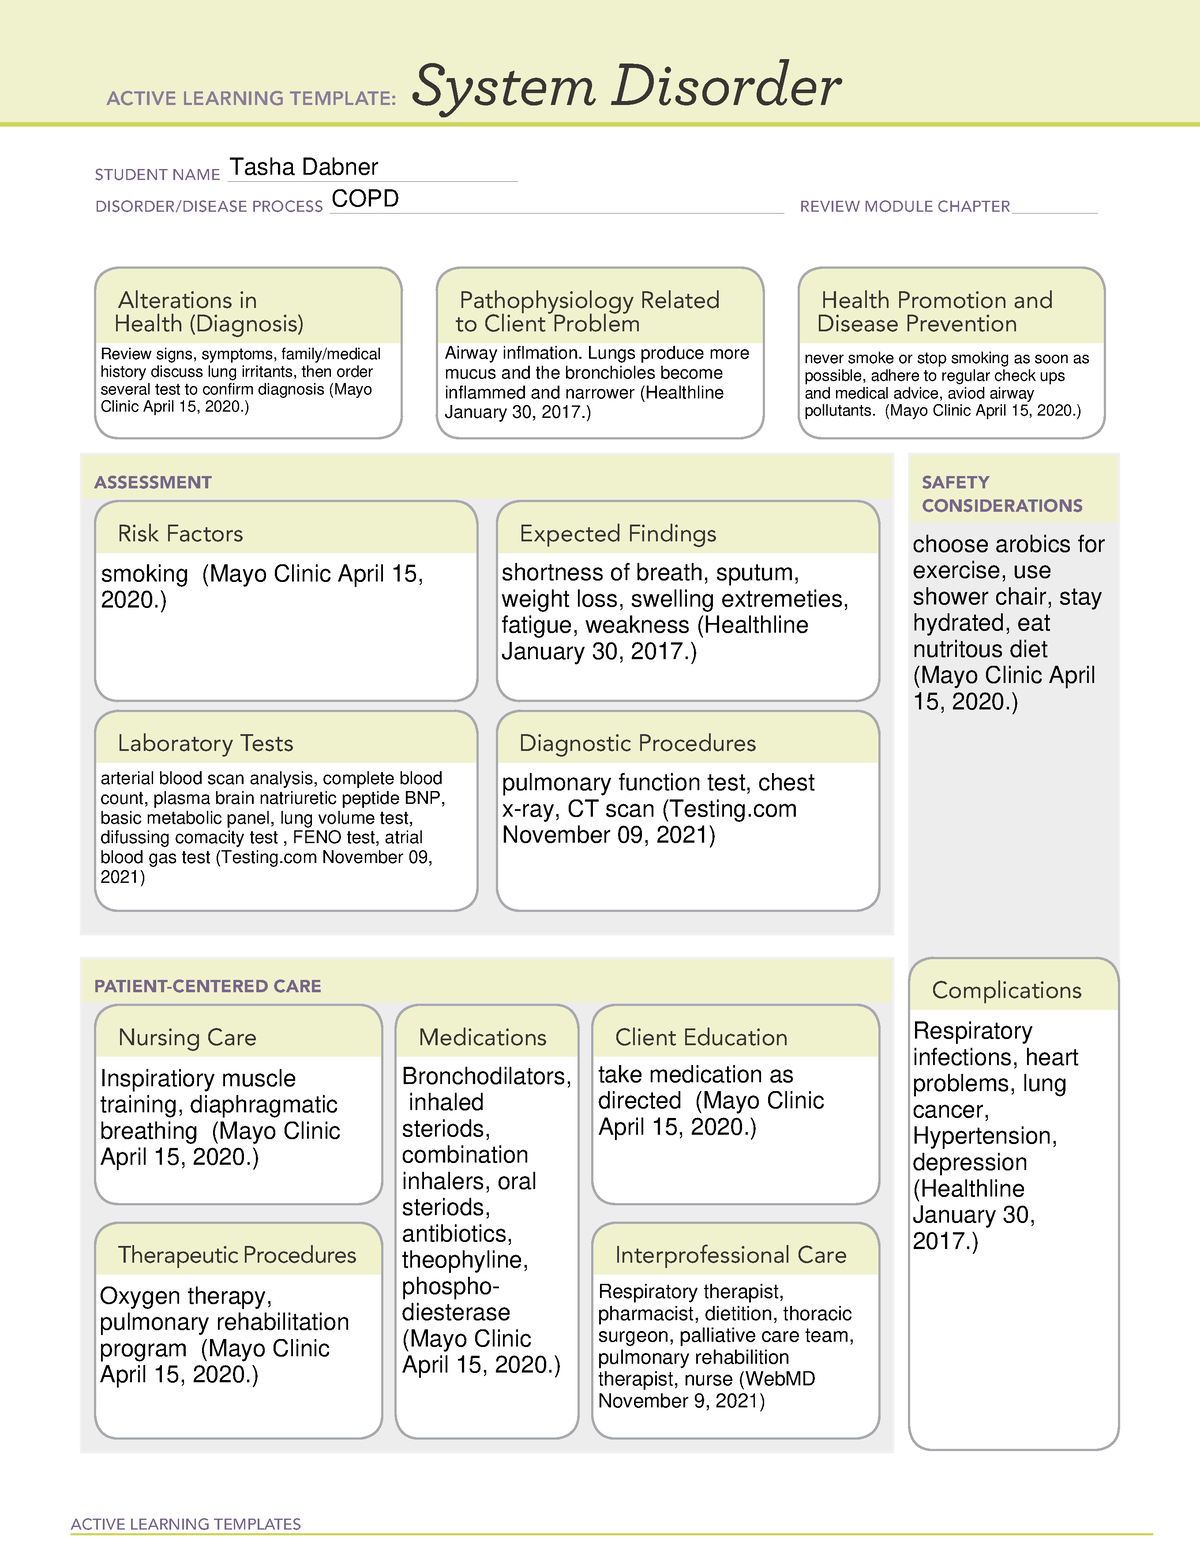 COPD concept map ACTIVE LEARNING TEMPLATES System Disorder STUDENT